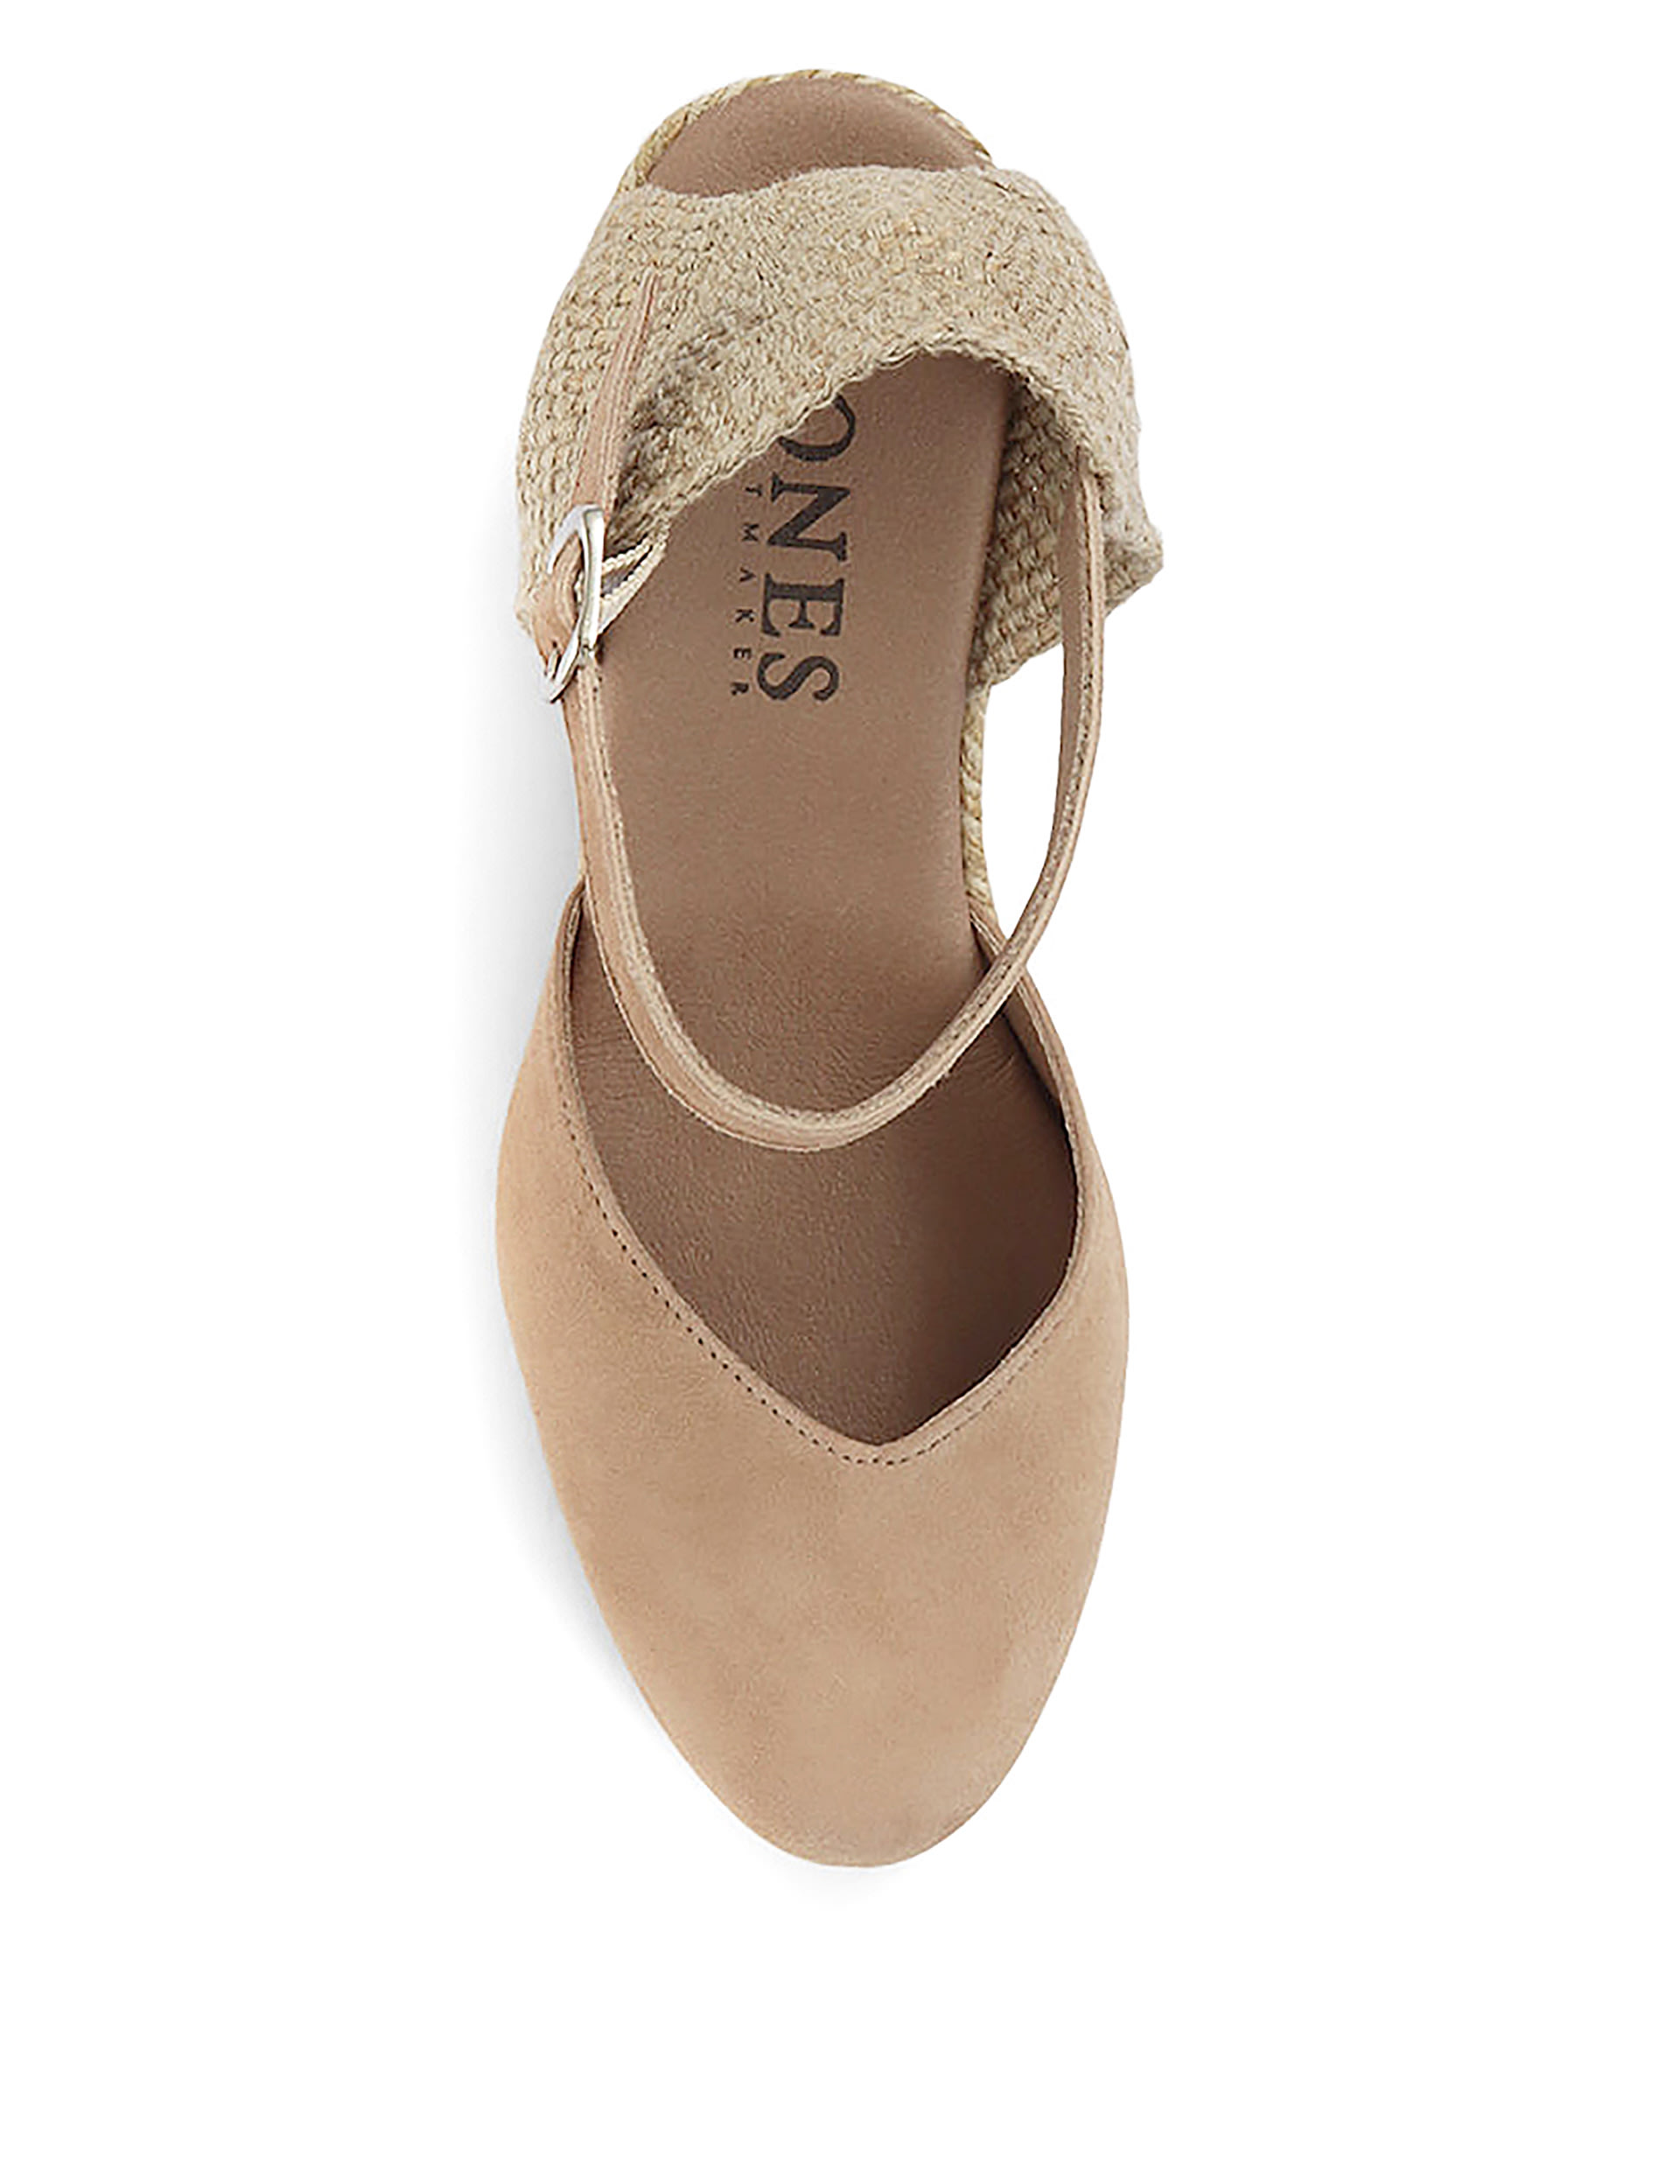 Suede Ankle Strap Wedge Espadrilles 4 of 6